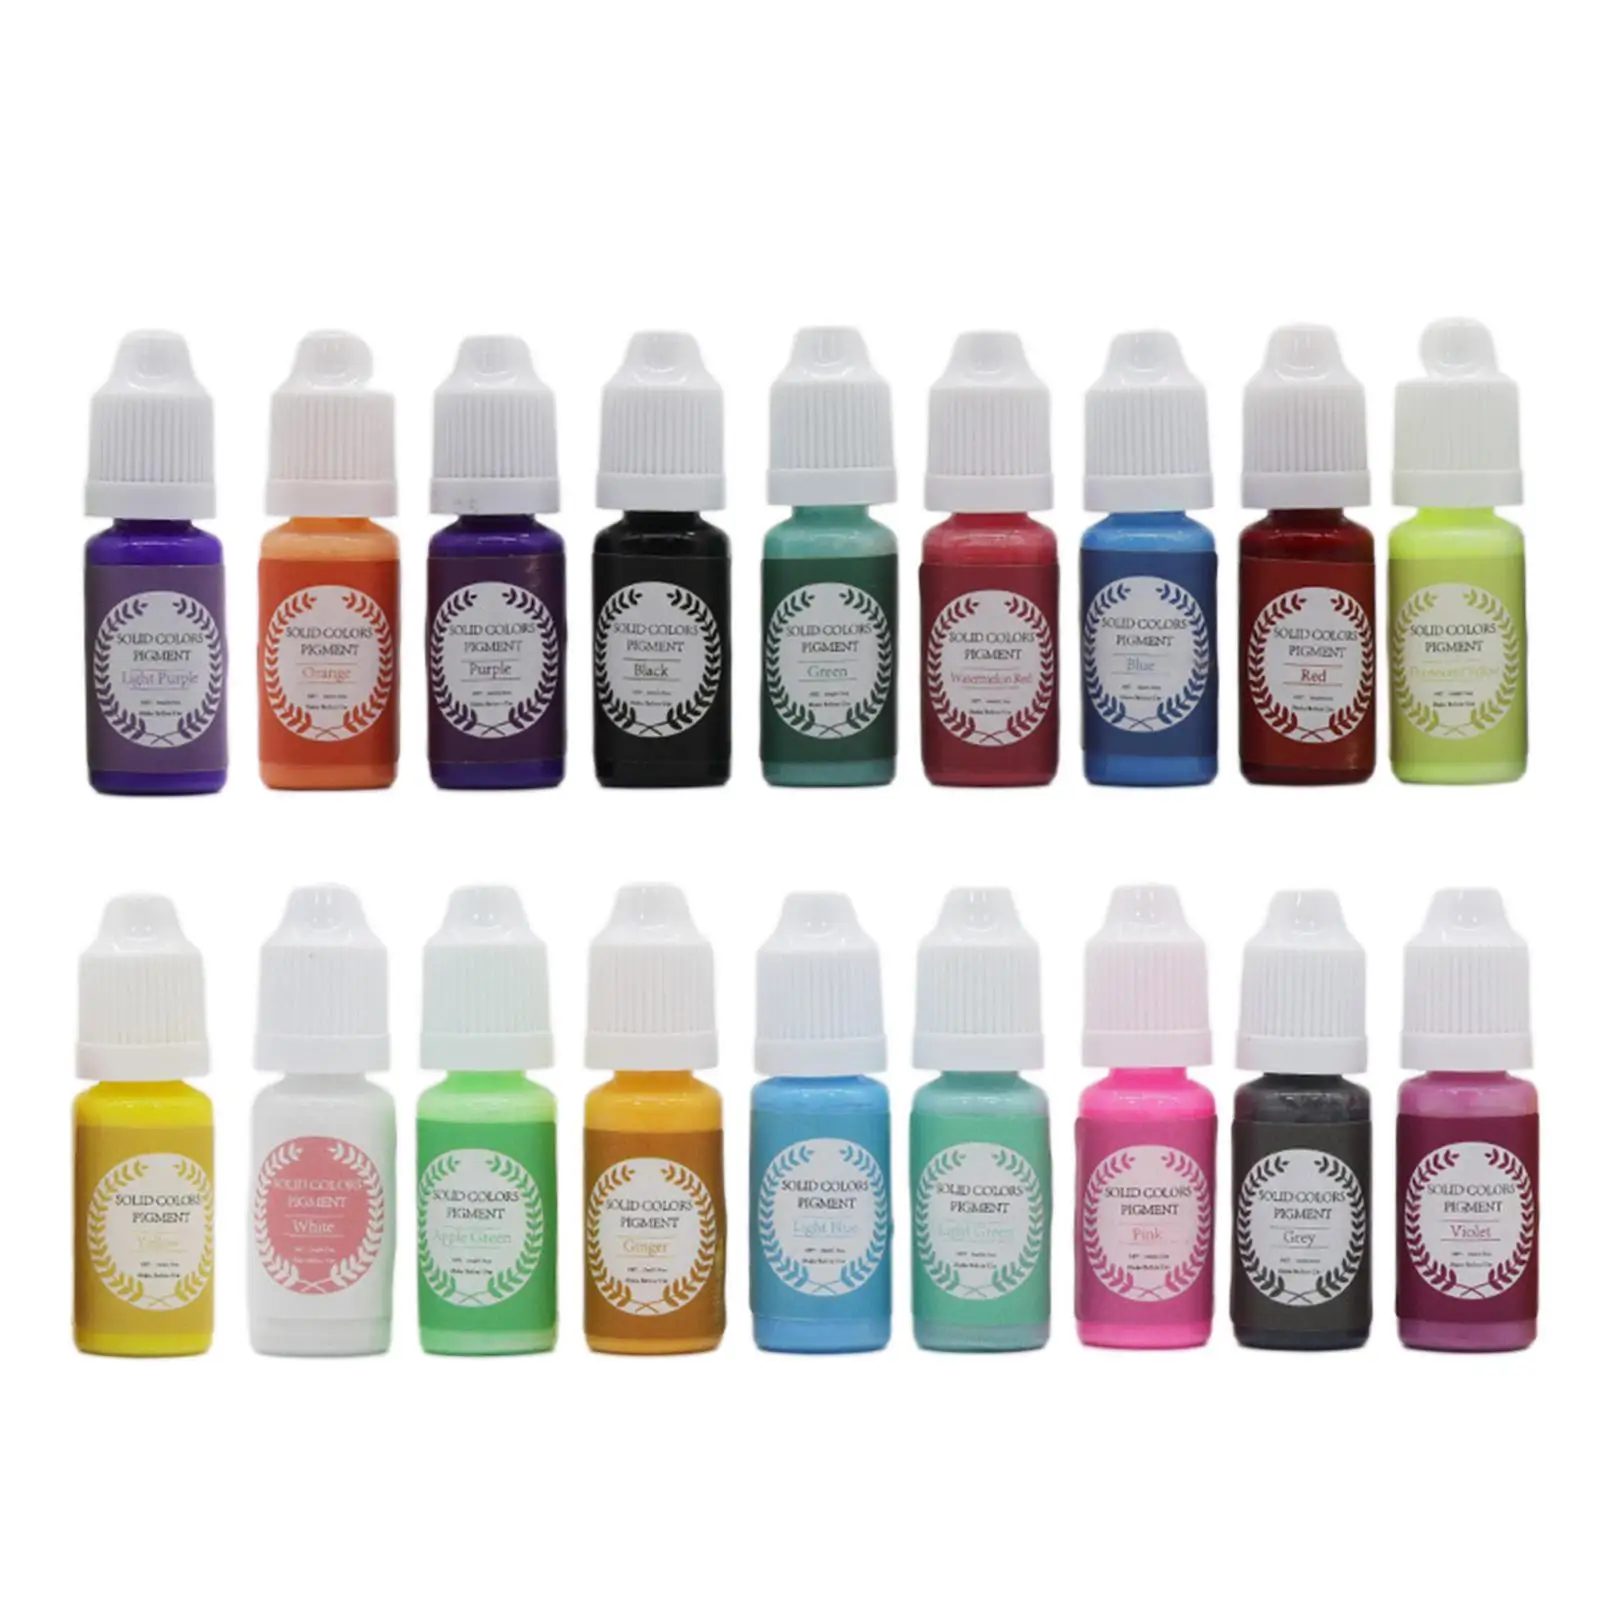 Alcohol Ink Set - 18 Vibrant Colors Alcohol Based Ink, Concentrated Epoxy Resin Paint Colour Dye, for Epoxy Resin Handmade Art